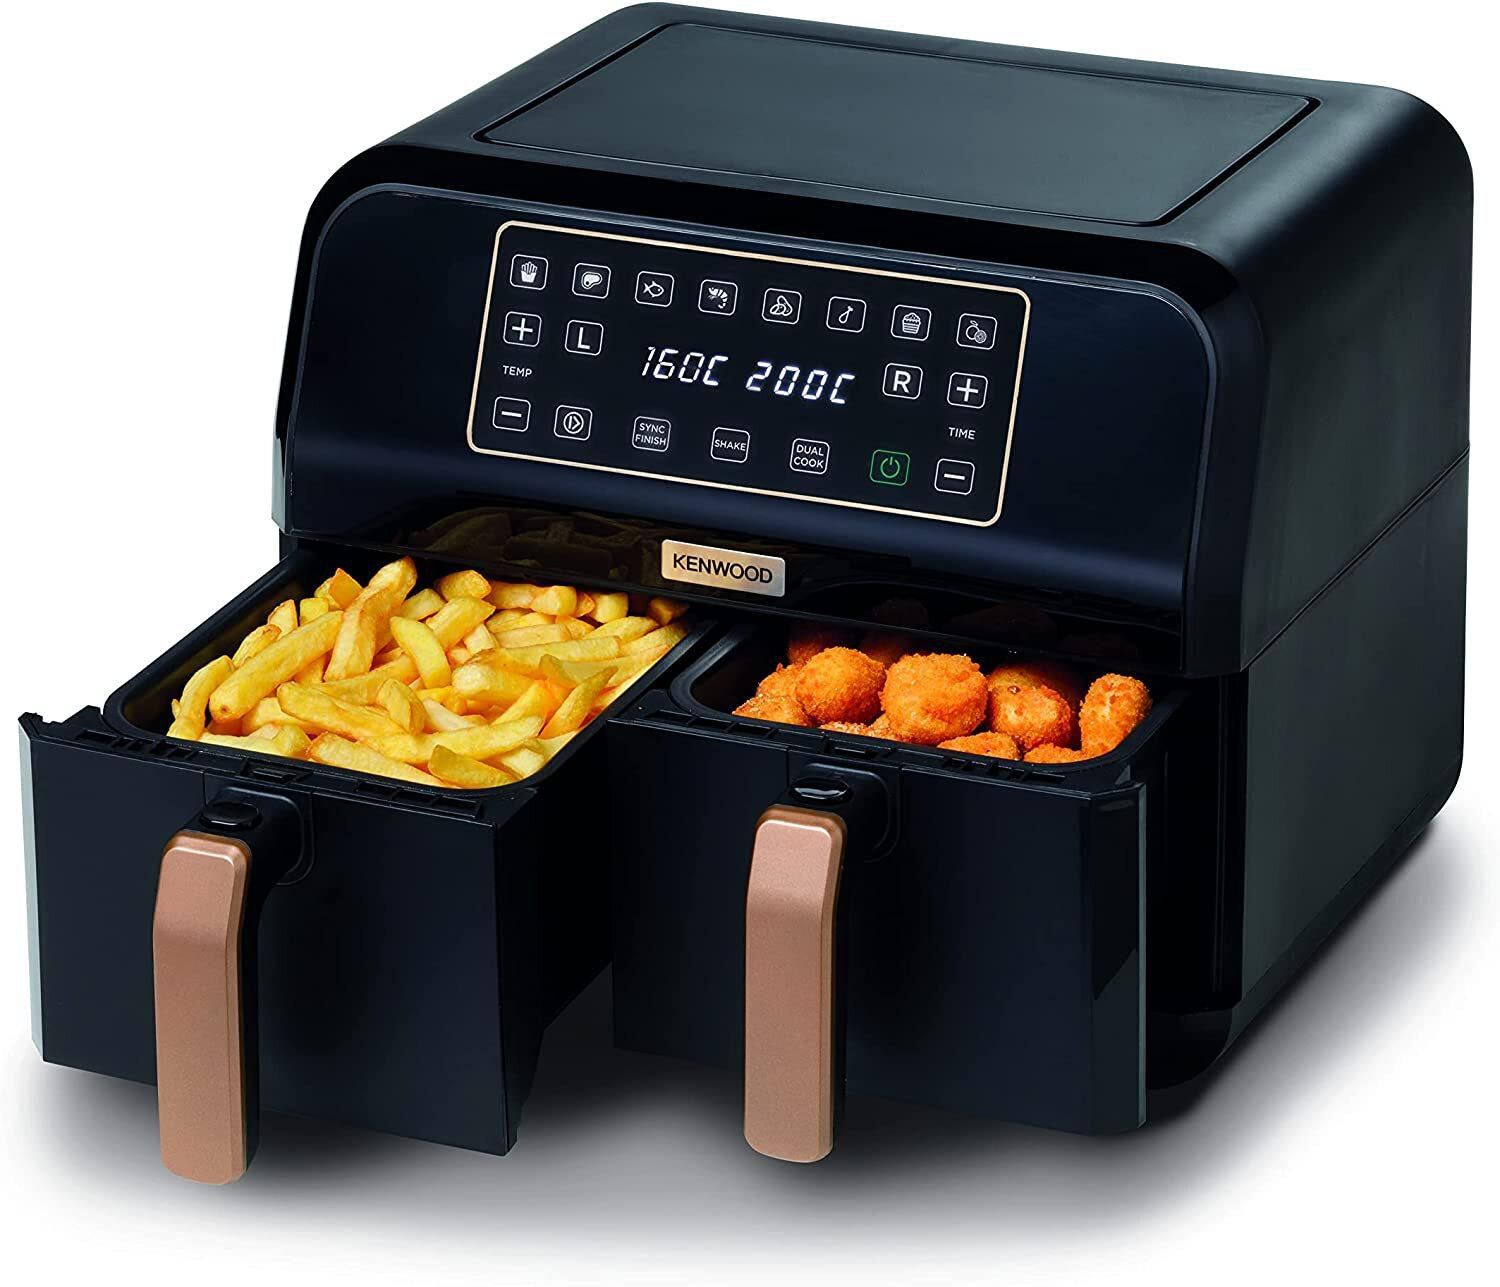 Kenwood Digital Twin Air Fryer XXXL, 4L+4L 1.7Kg+1.7Kg With Dualzone Technology &amp; Dual Frying Baskets For Frying, Grilling, Broiling, Roasting, Baking, Toasting &amp; Reheating HFP70.000BK, Black/Gold